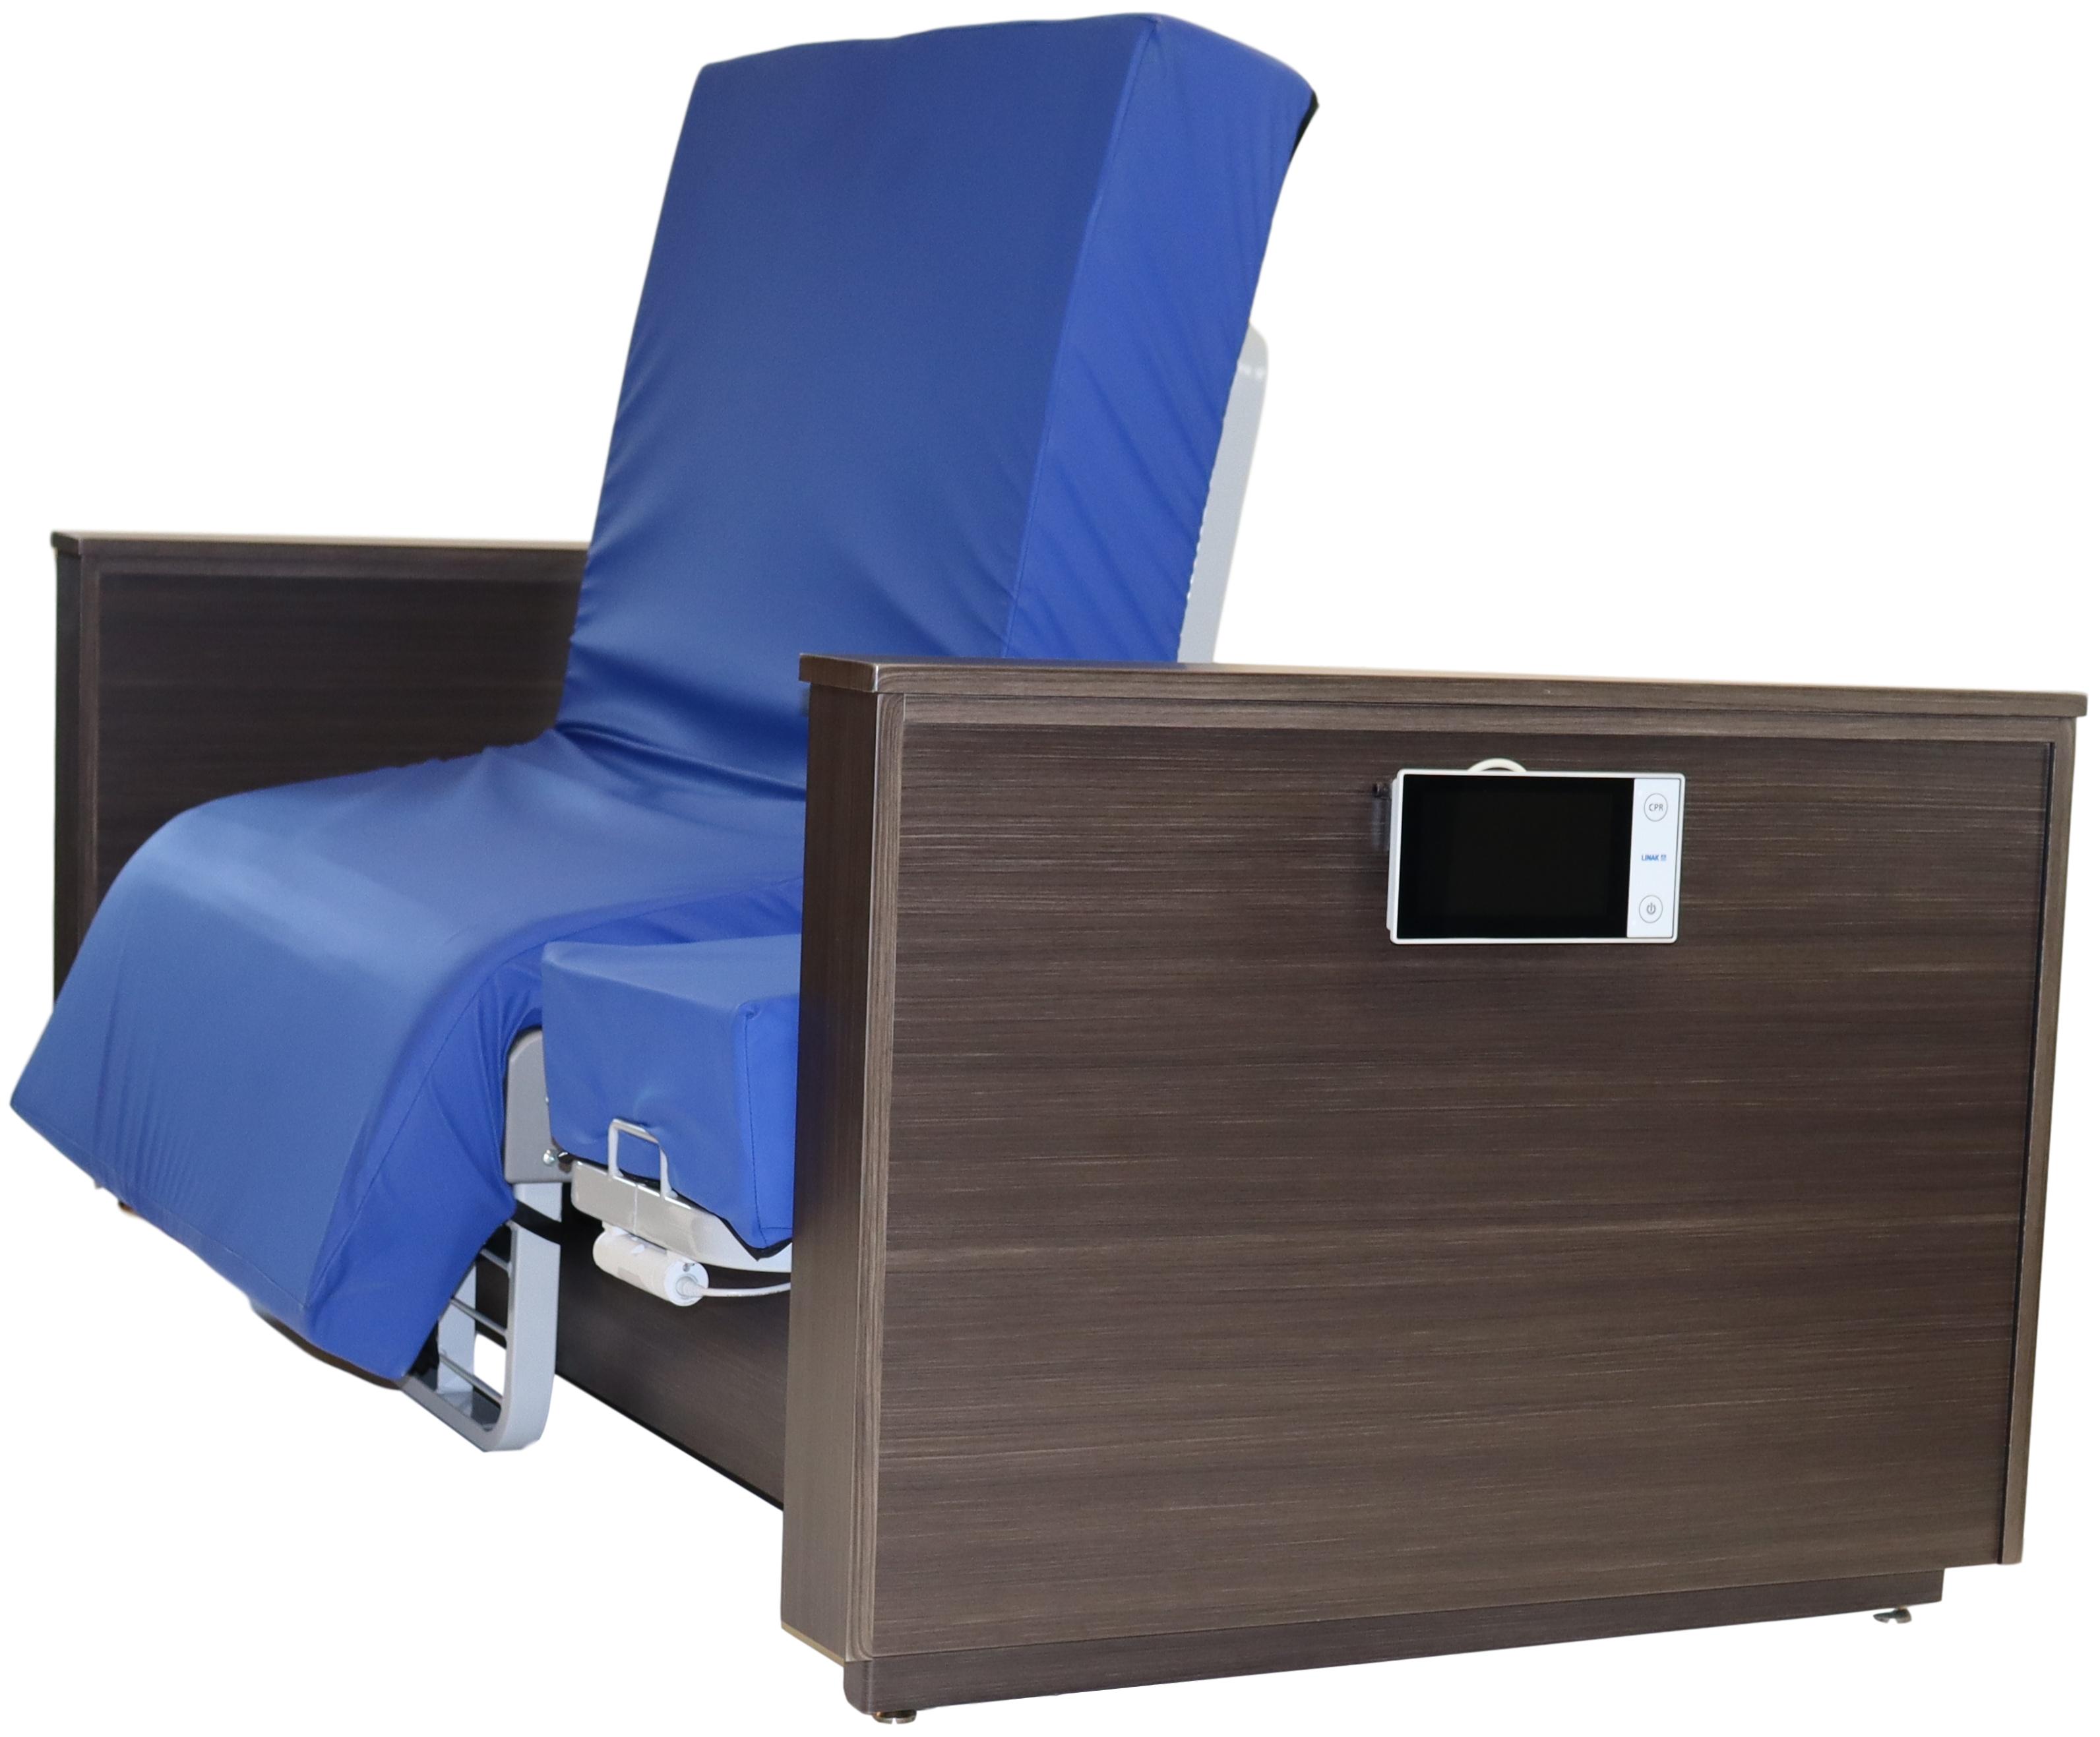 Image of ActiveCare Deluxe Hospital Bed in upright position.